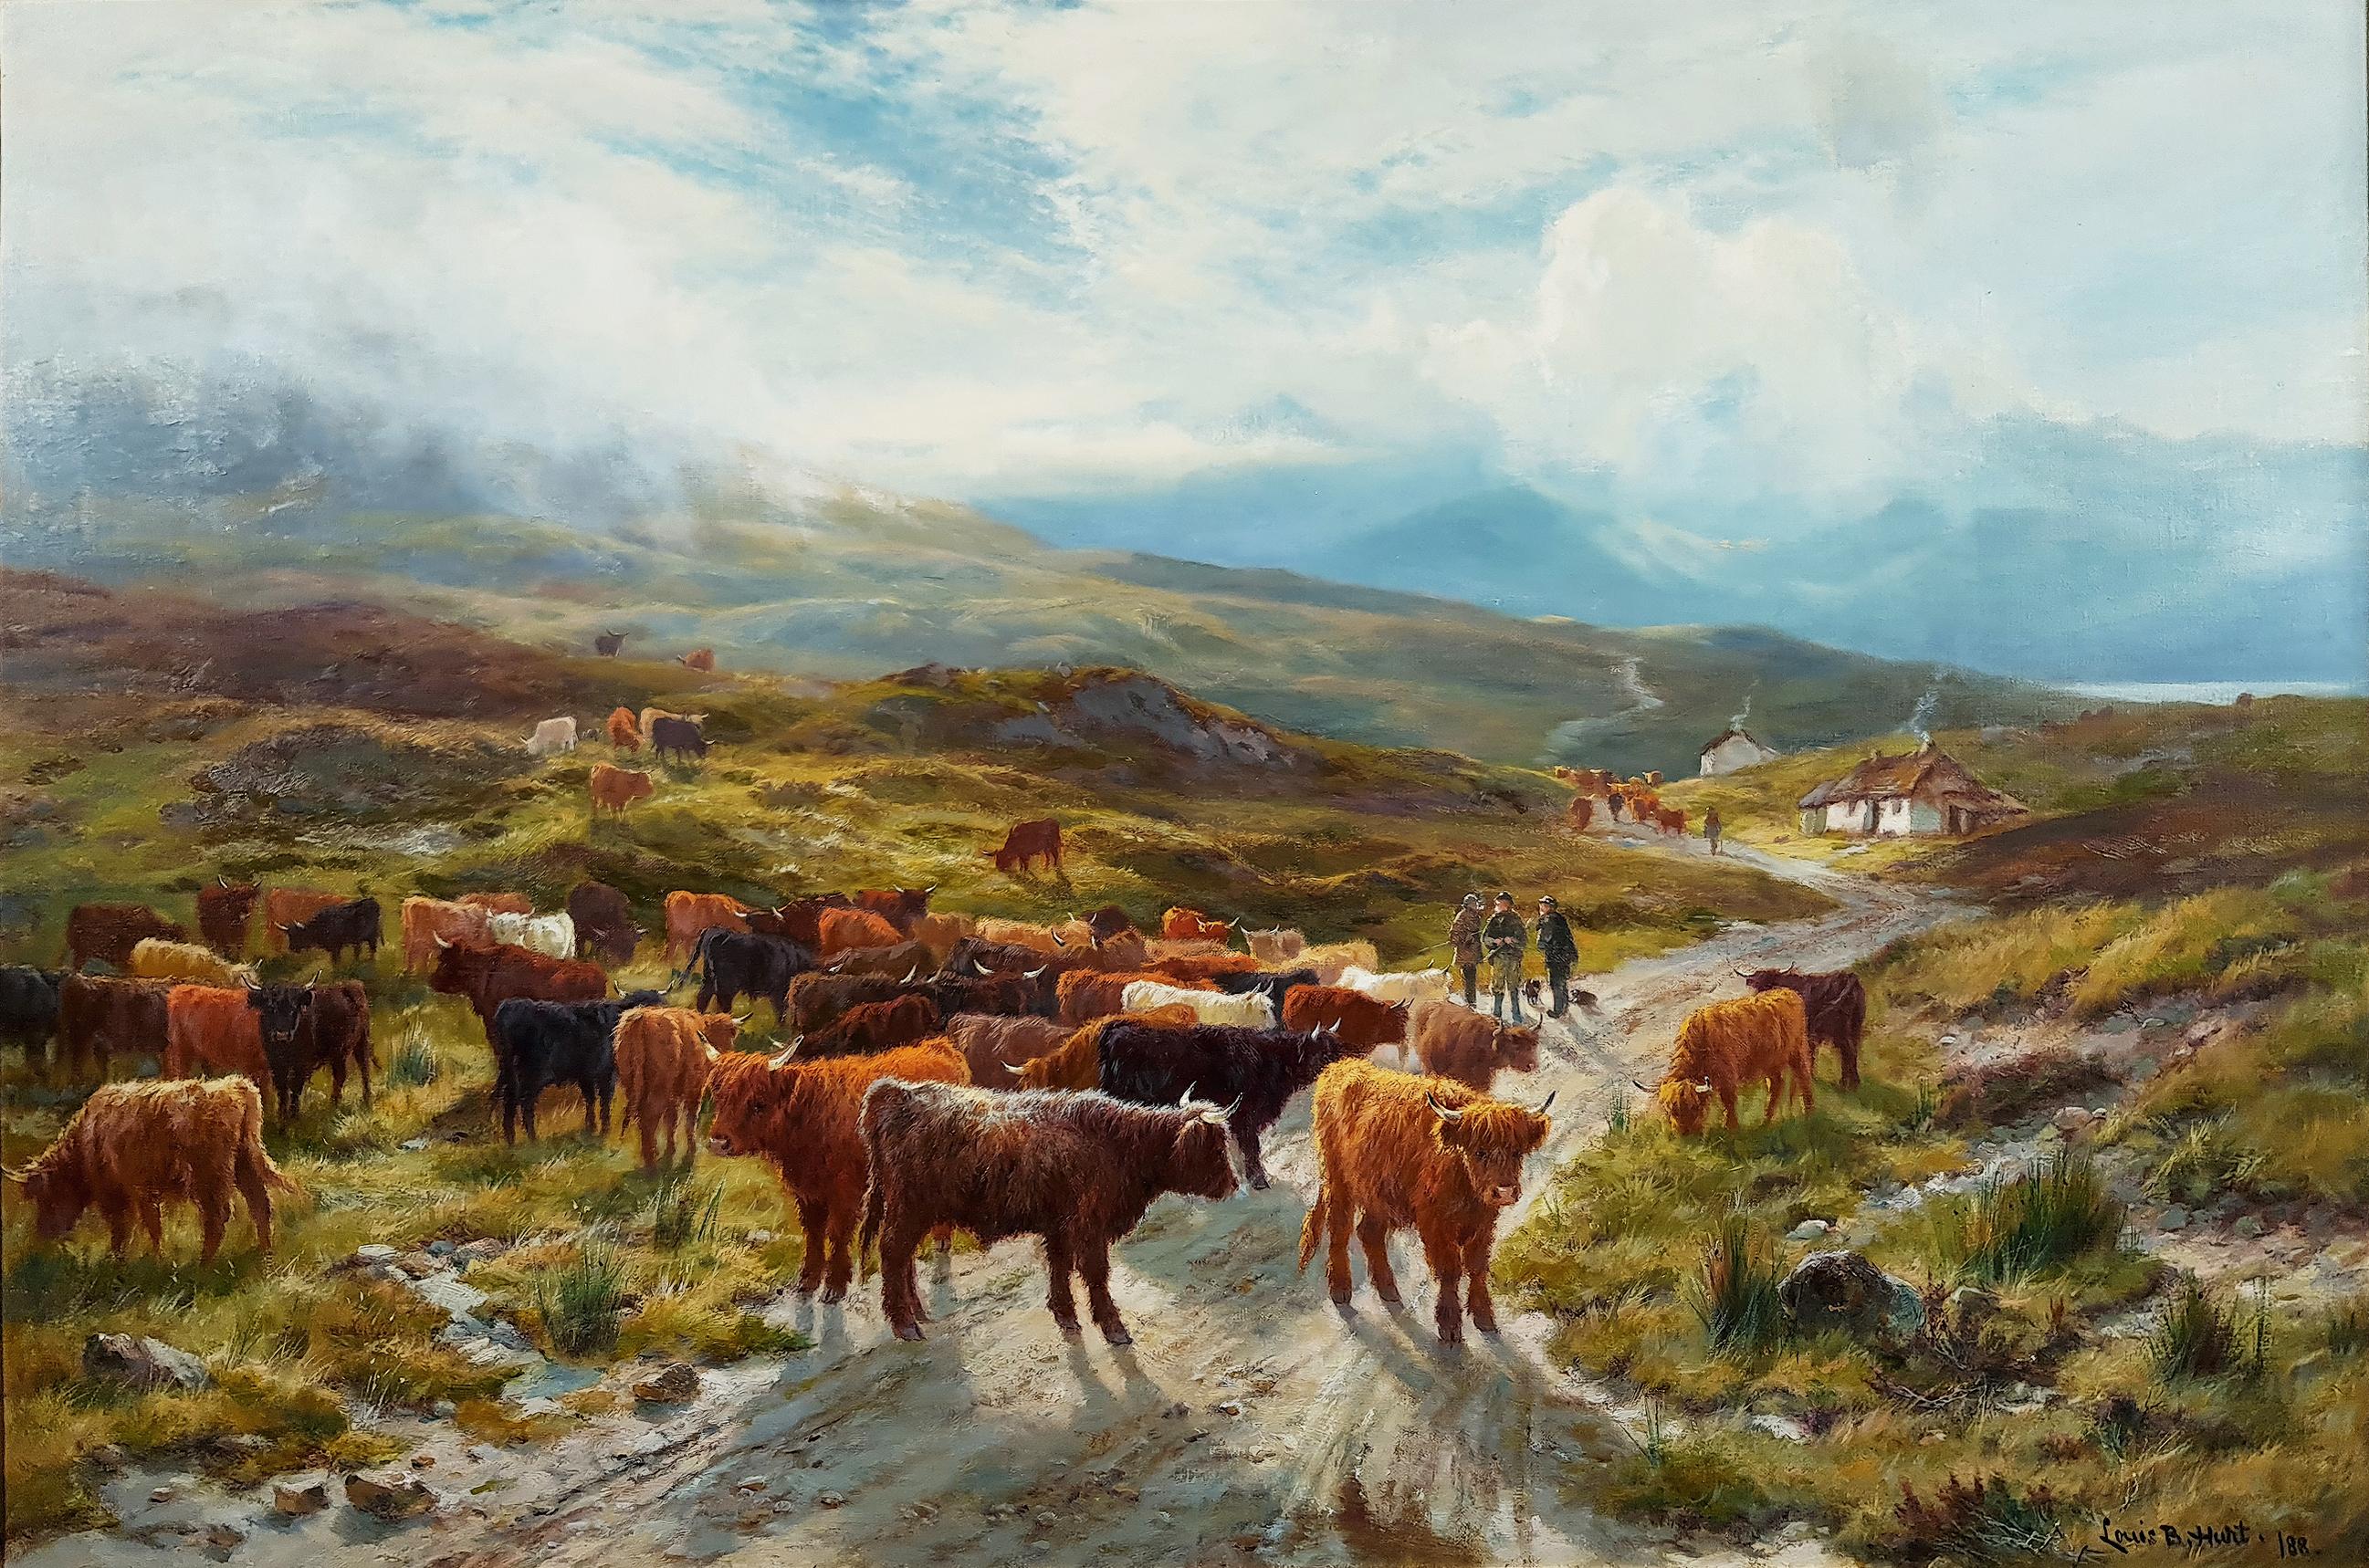 Highland Pastures - Painting by Louis Bosworth Hurt